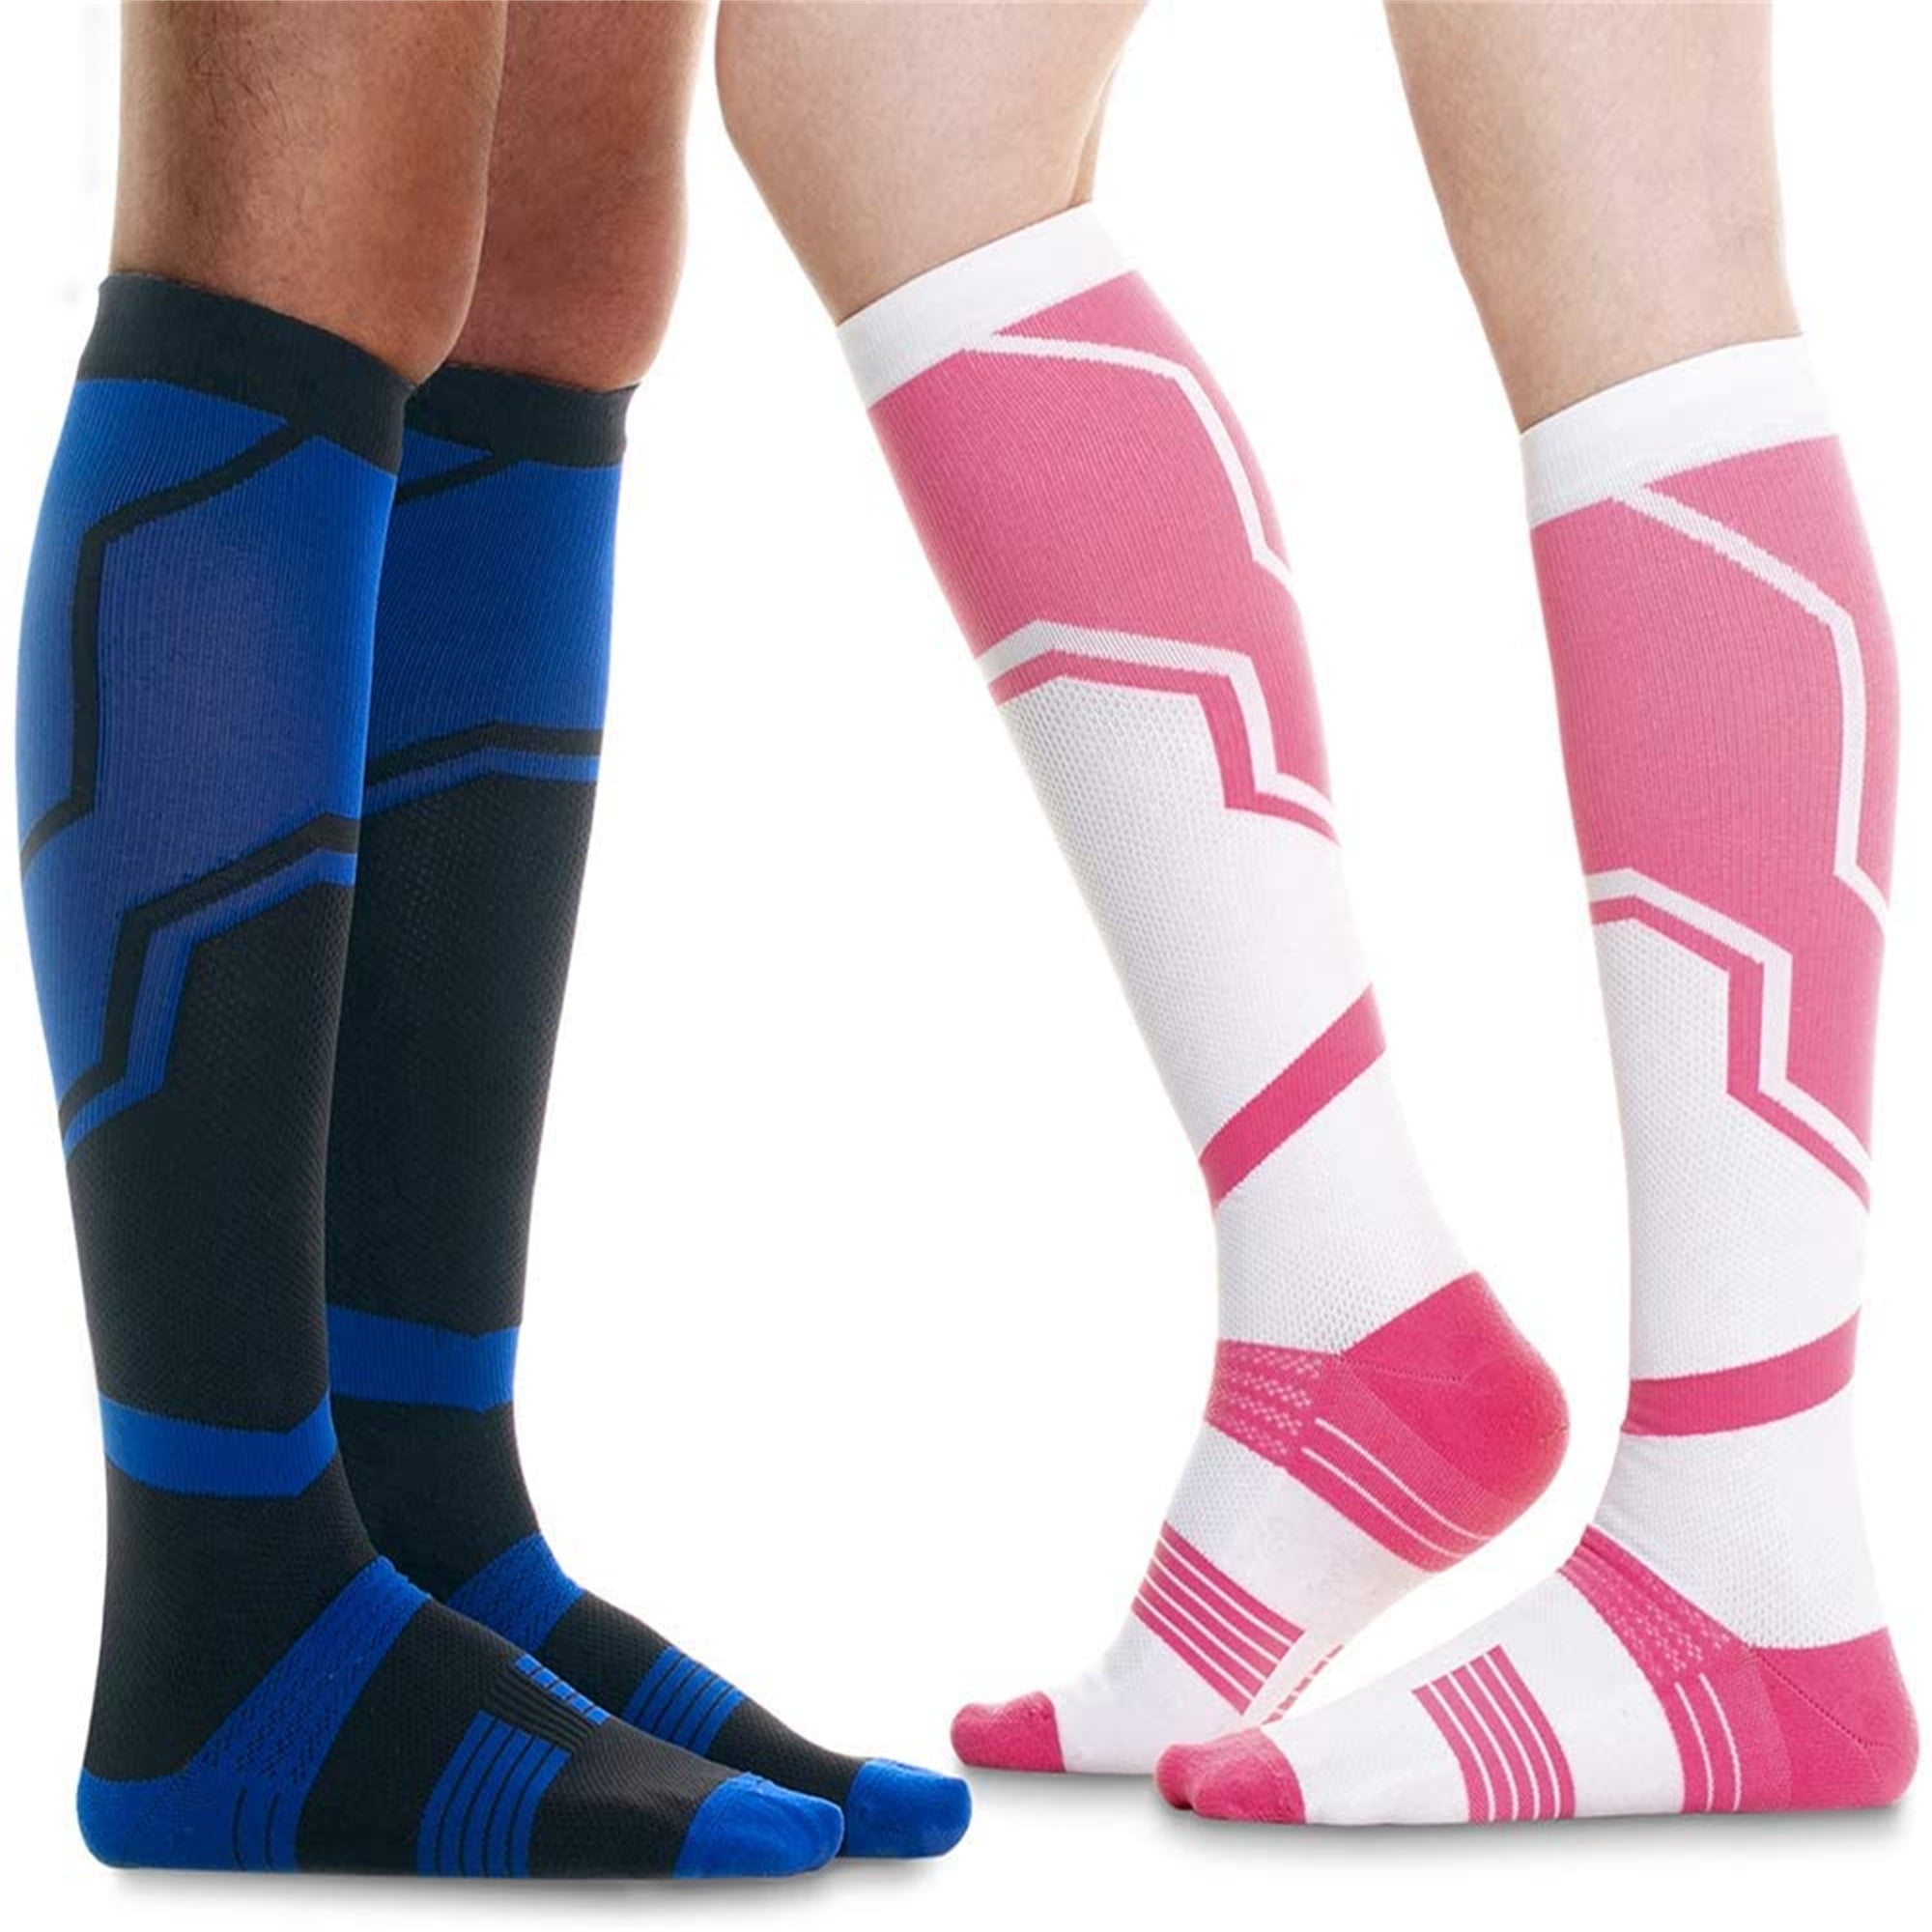 4 Pairs Details about    Copper Compression Socks 20-30mmHg Graduated Support Mens Women S-XXL 